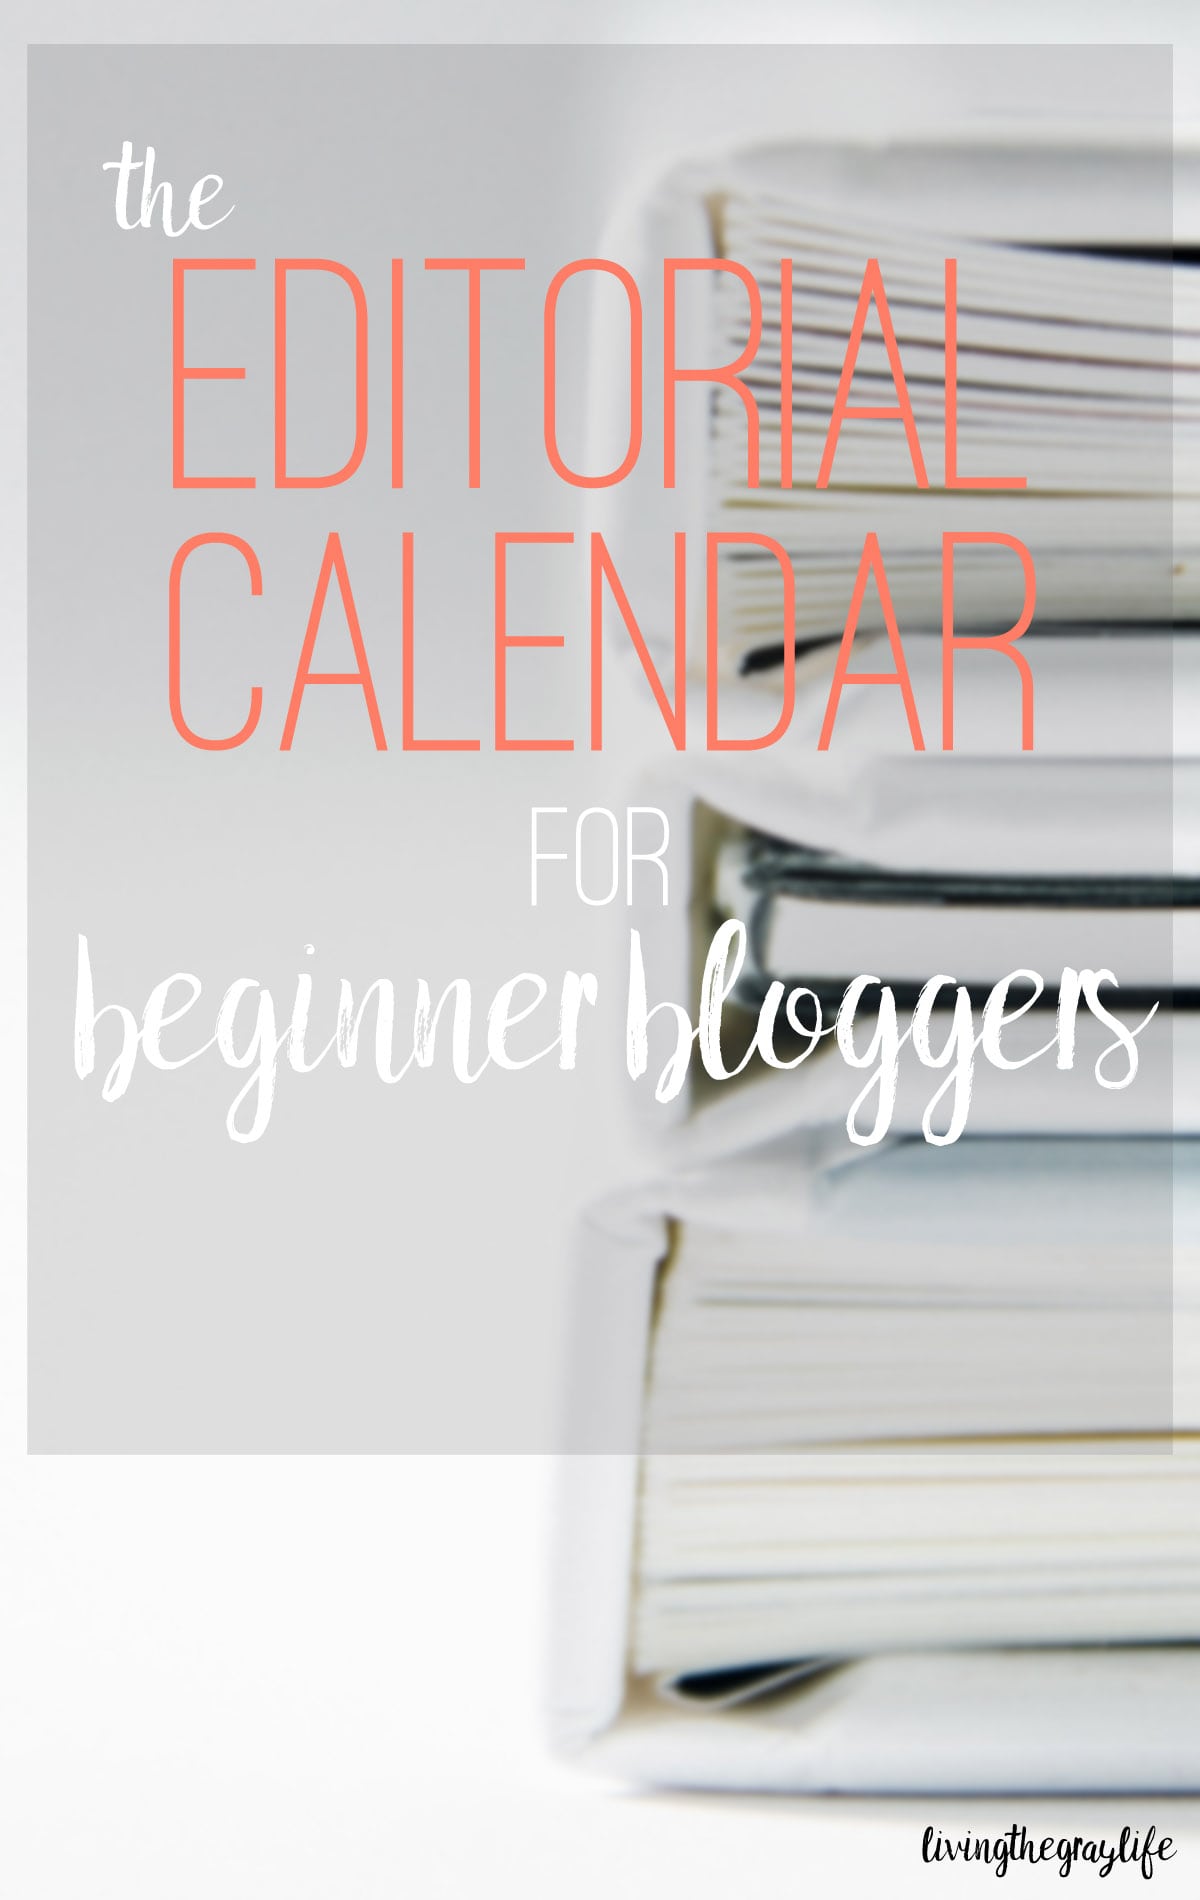 Master the editorial calendar with this post!